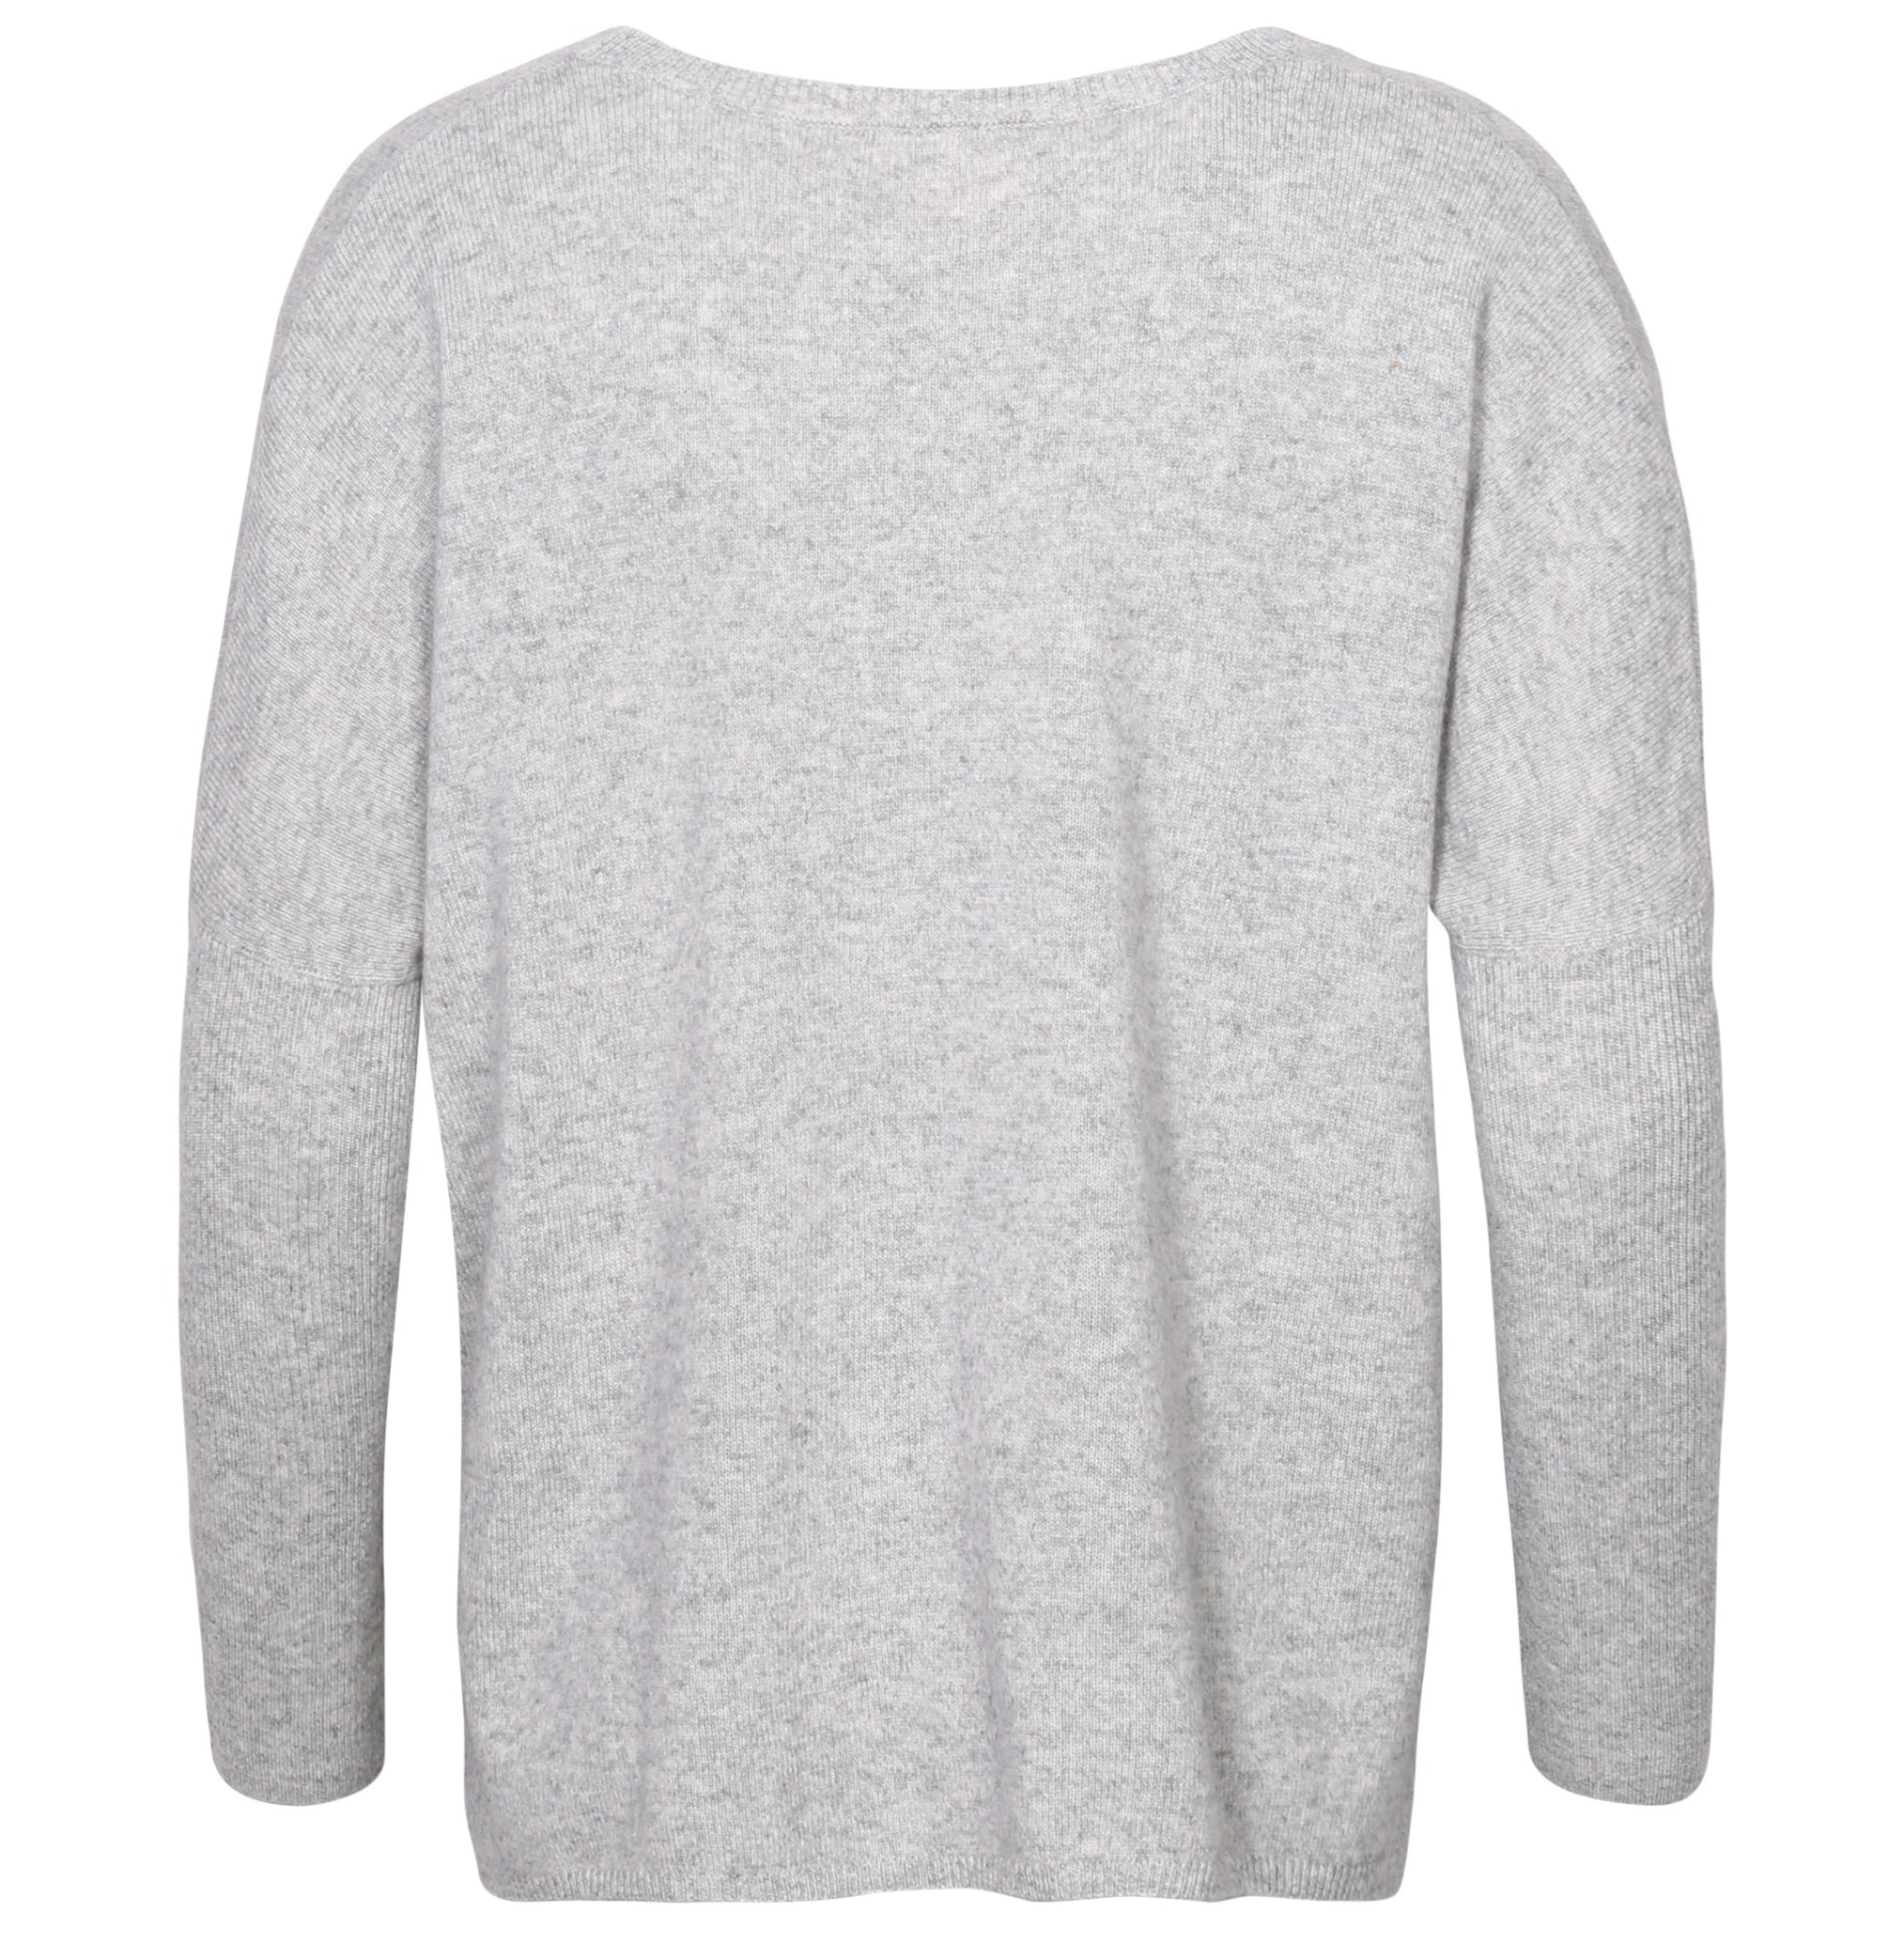 ABSOLUT CASHMERE Poncho Sweater Astrid in Grey Melange